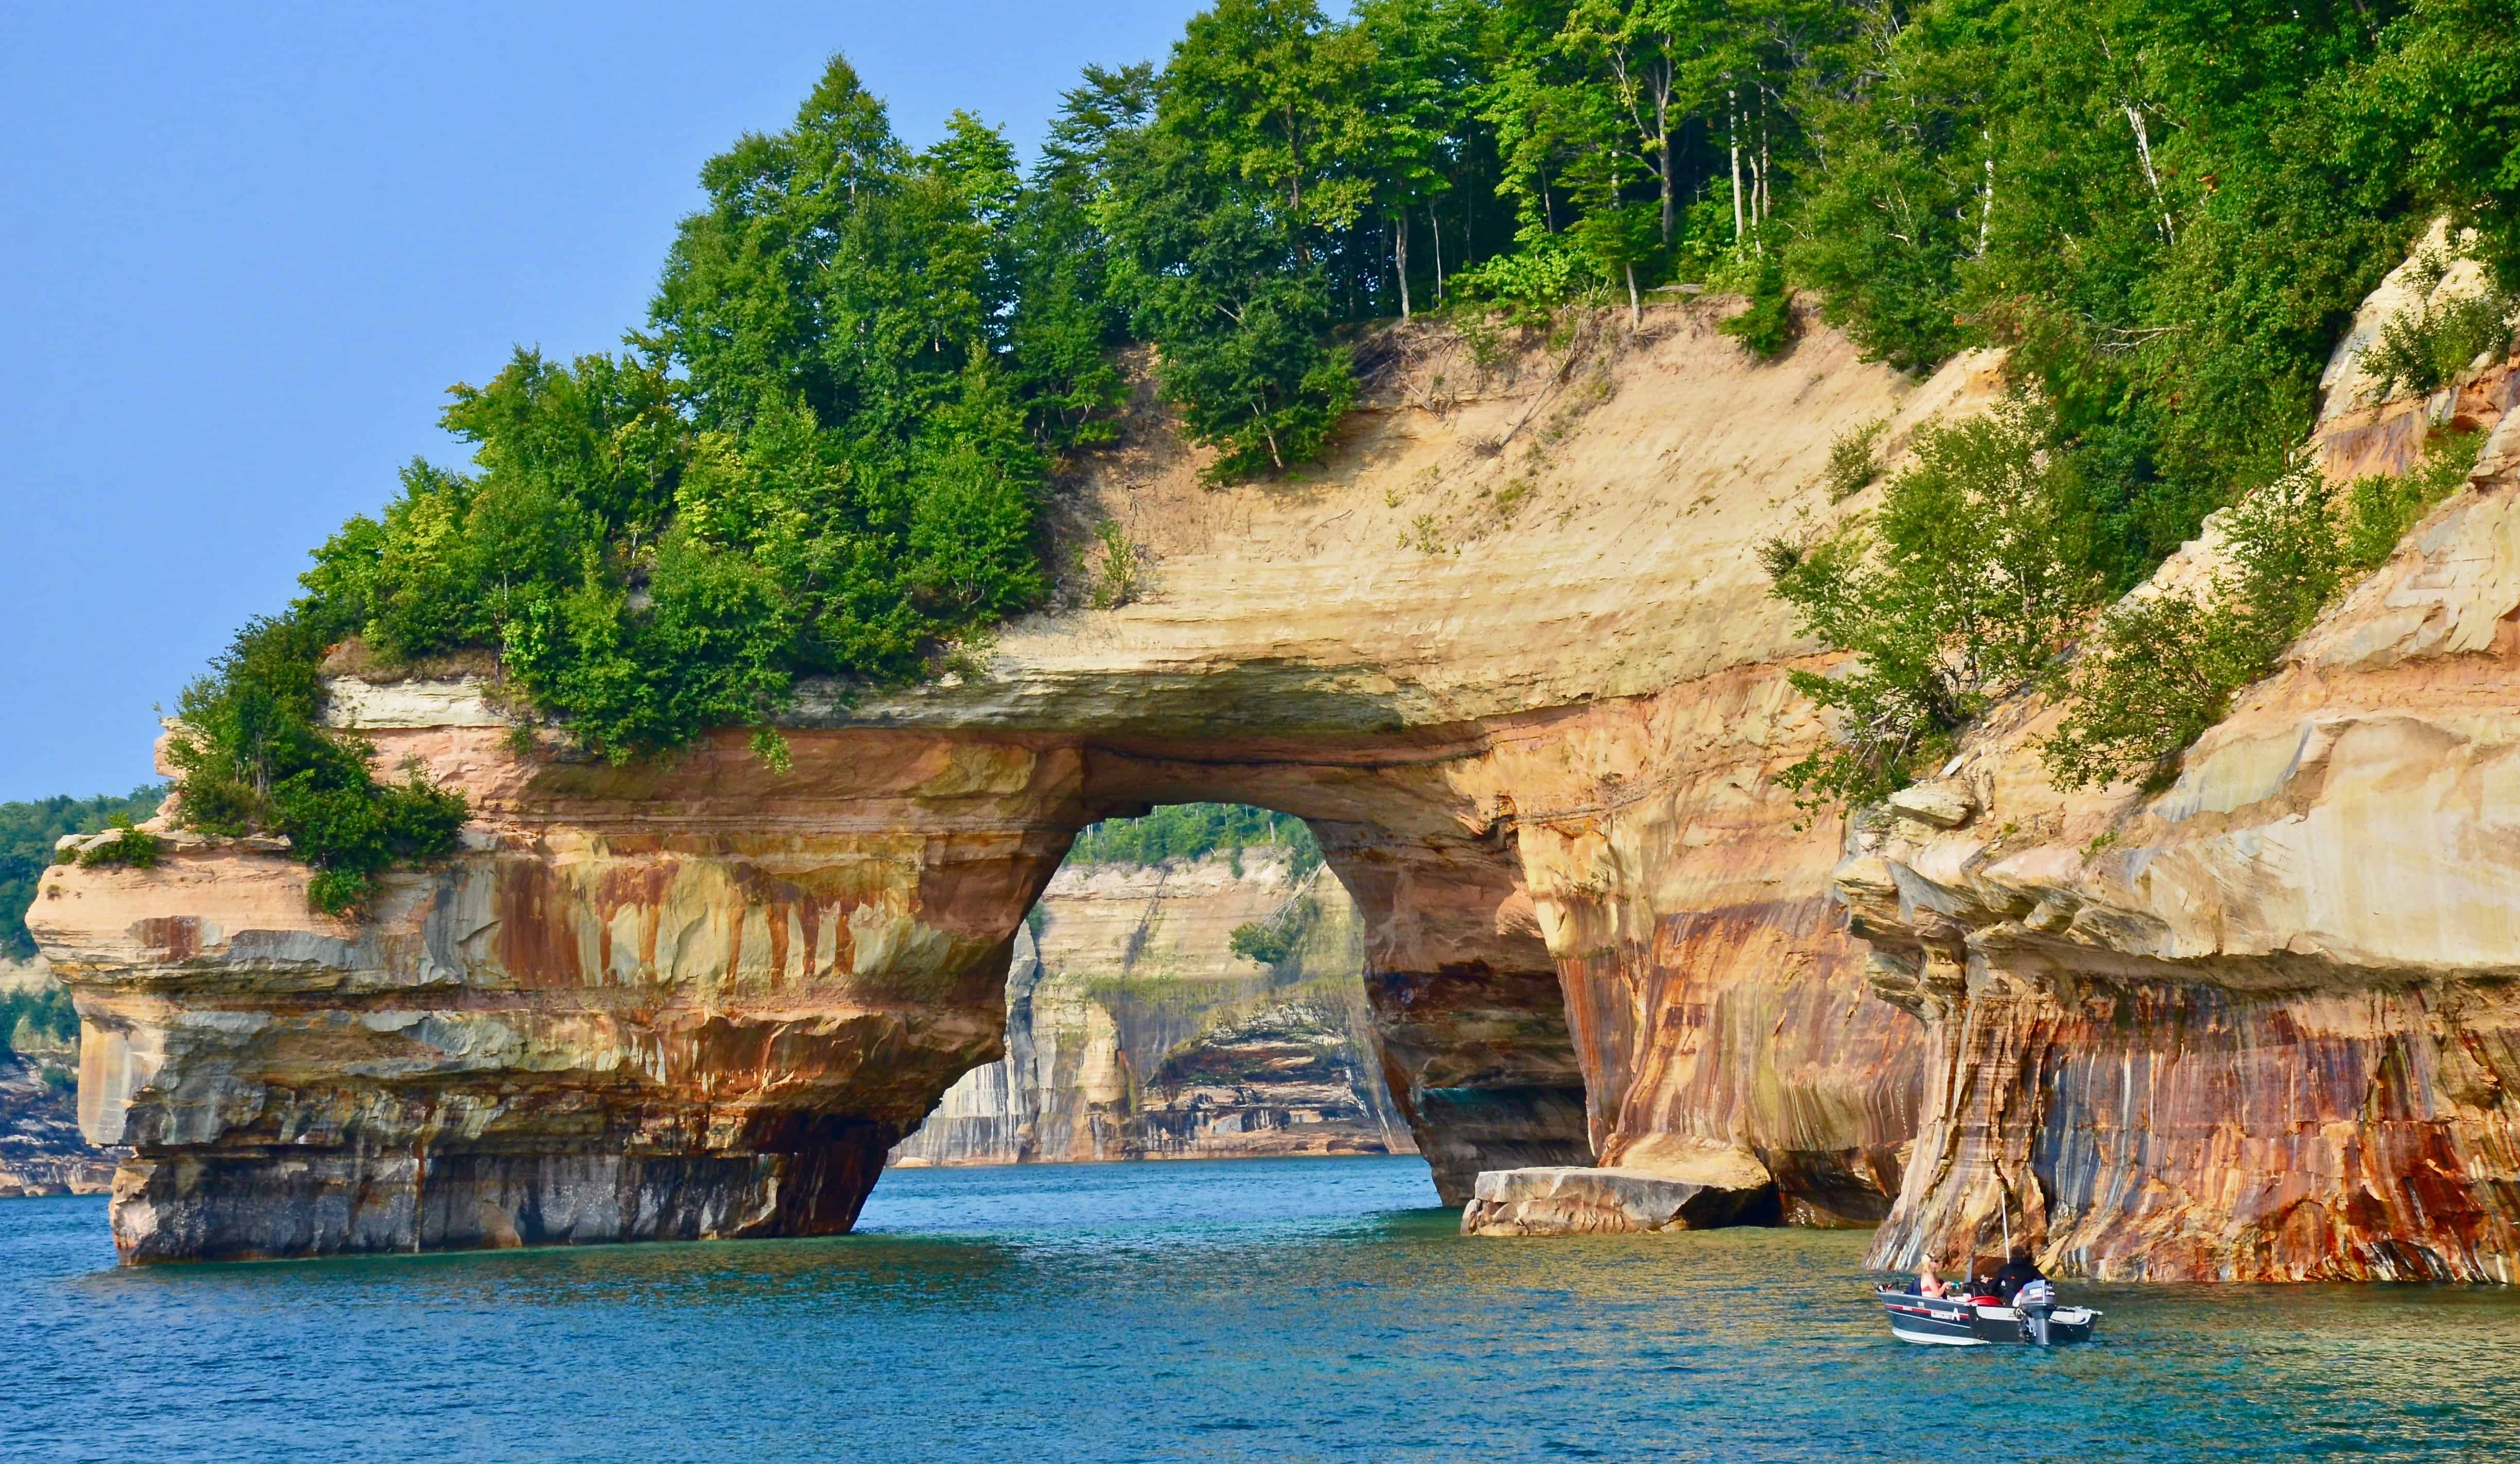 Exploring PIctured Rocks National Lakeshore on a trip to Michigan